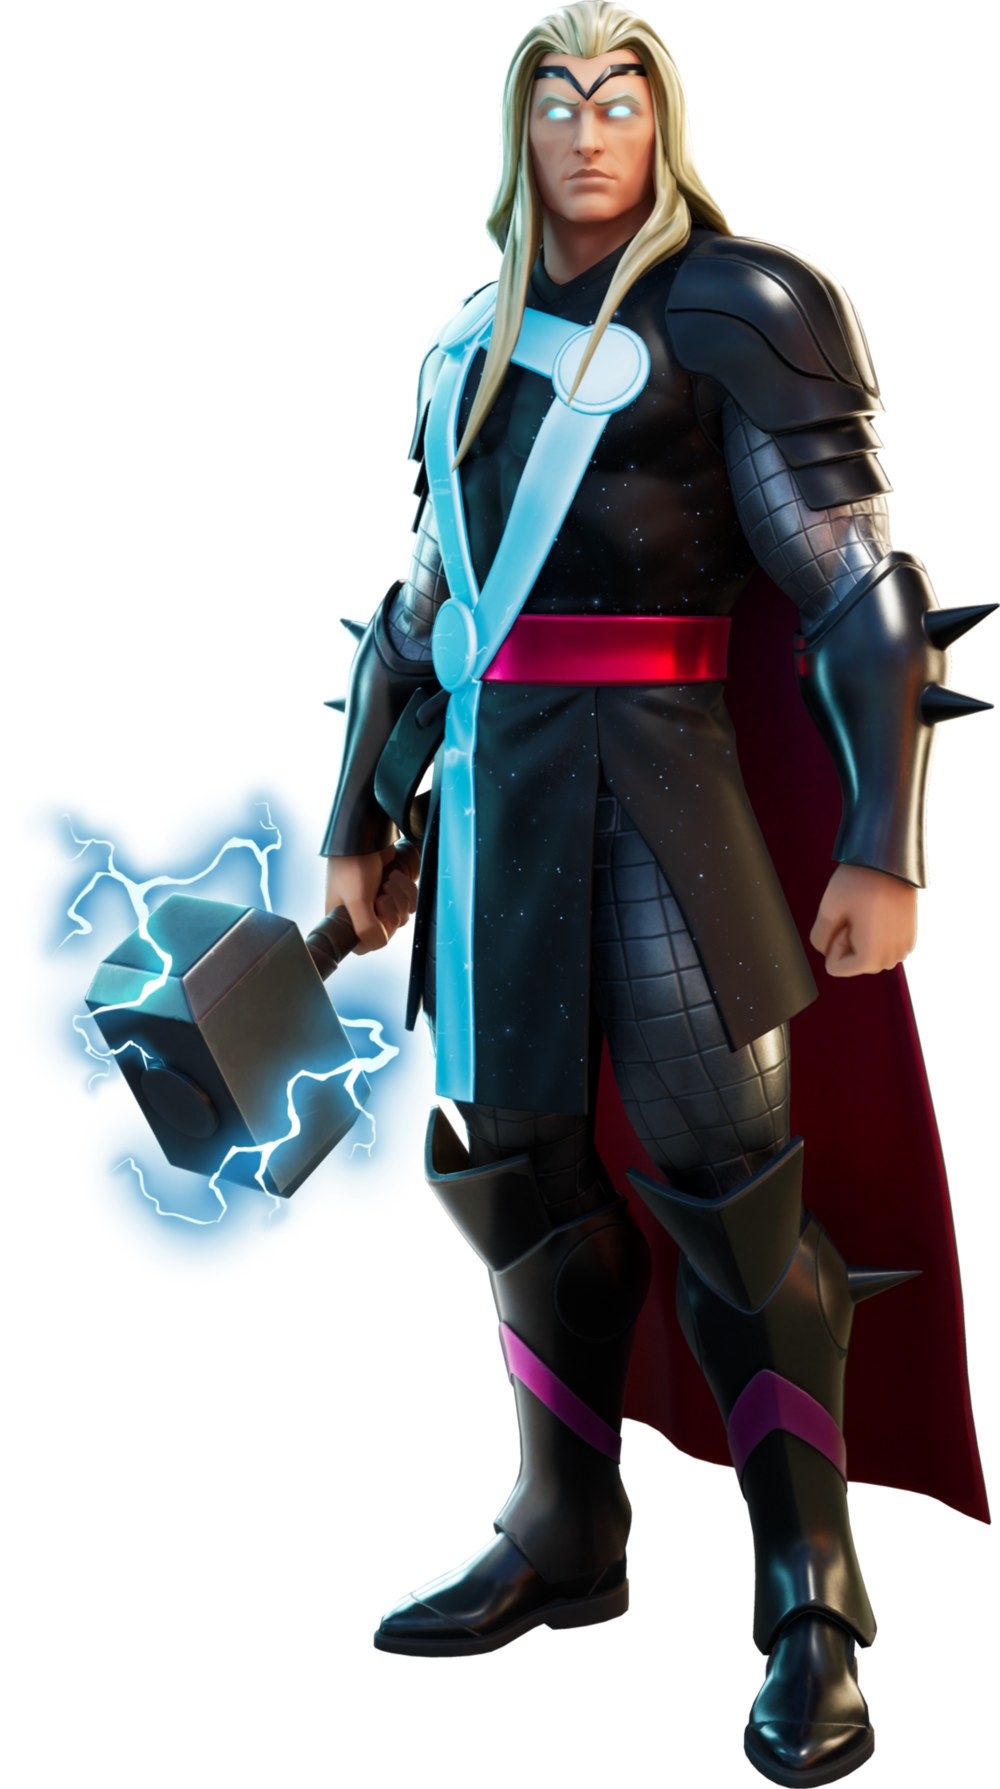 Thor Fortnite outfit wields his hammer that is emitting lightning